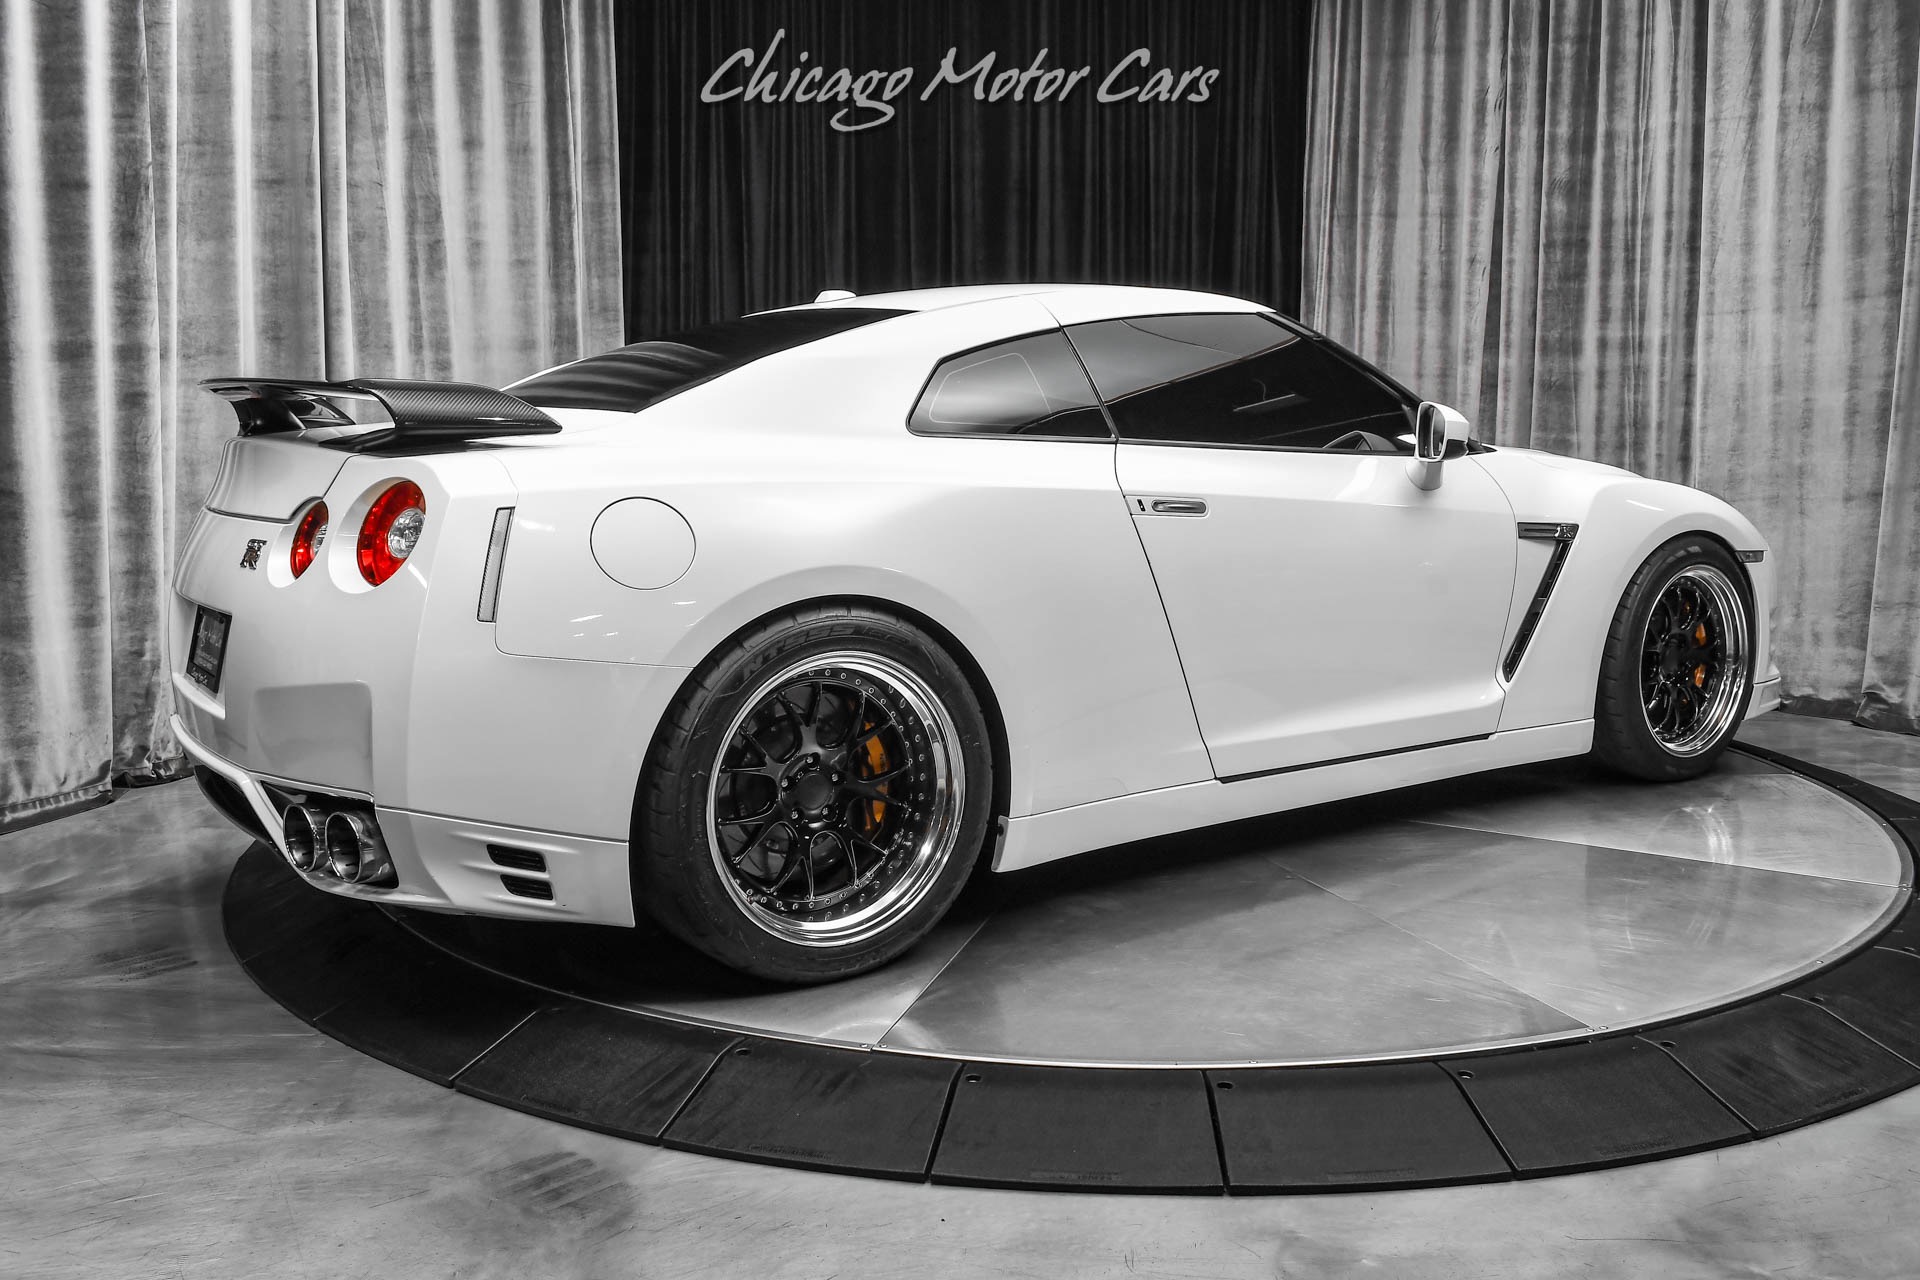 Used-2014-Nissan-GT-R-Black-Edition-Coupe-FULL-BOLT-ON-650-WHP-Incredibly-Clean-Build